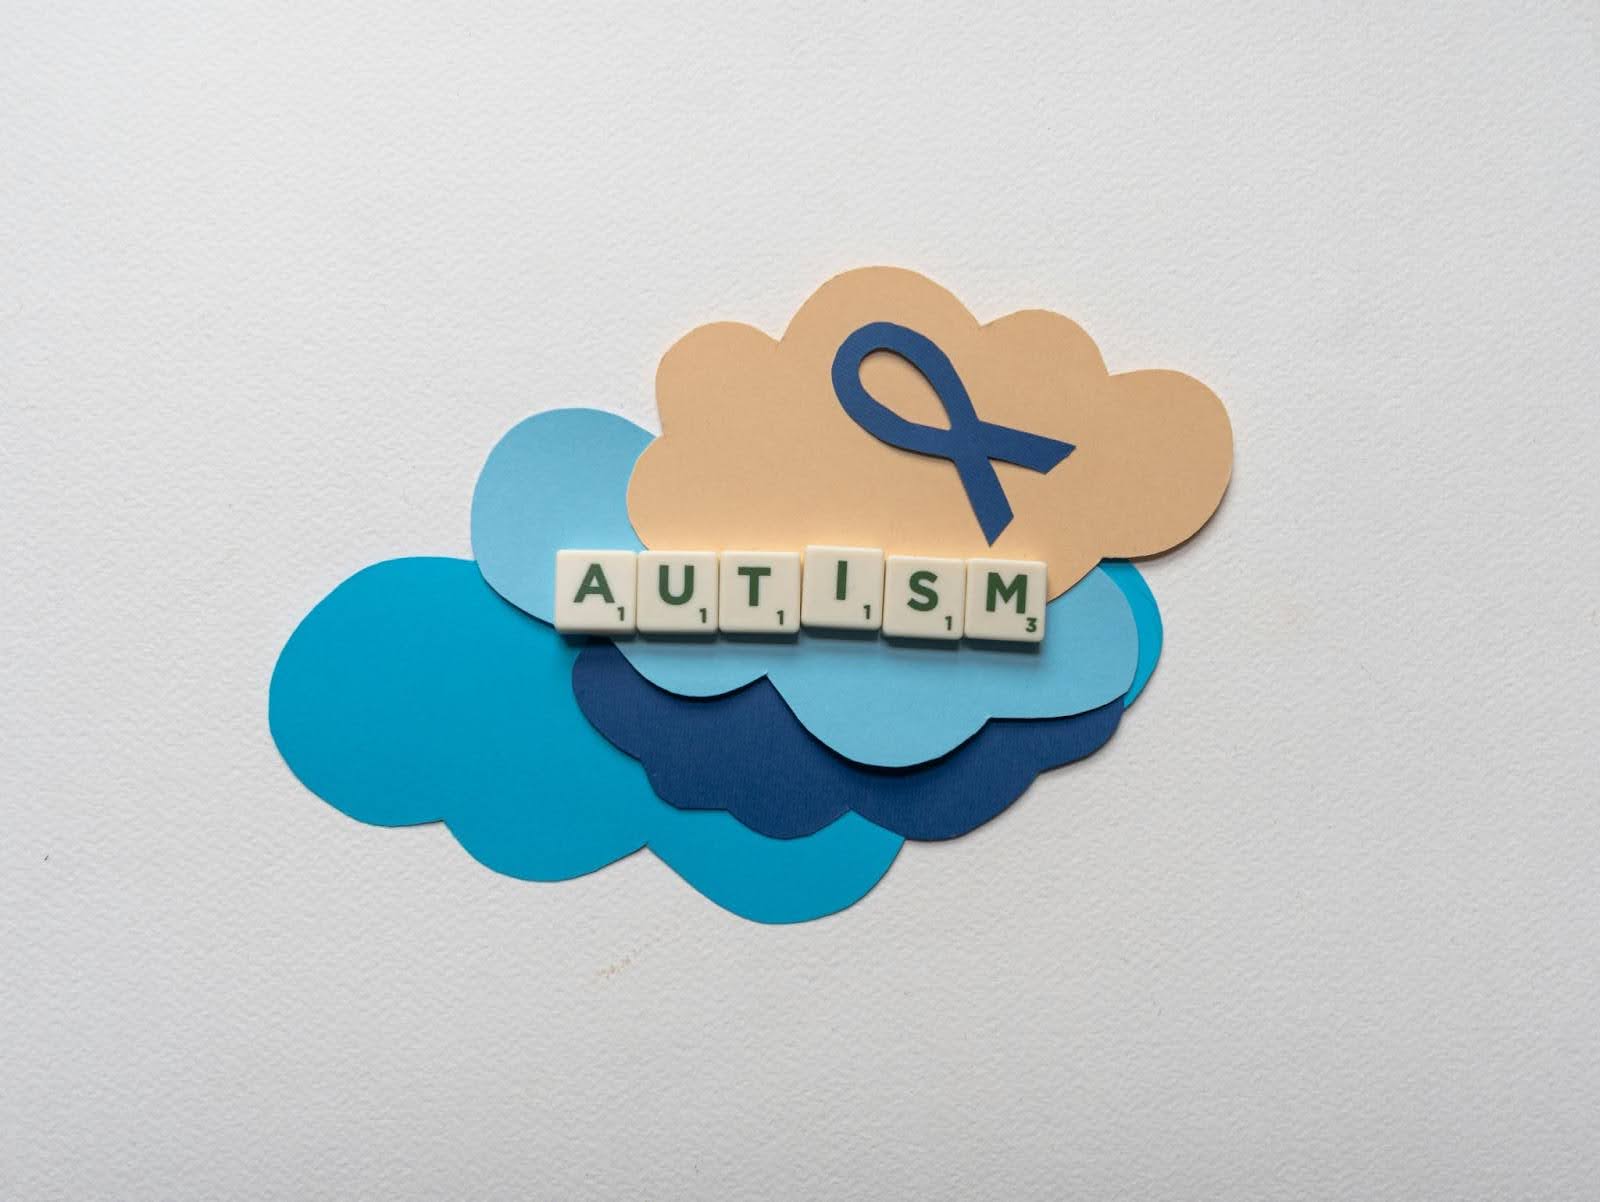 A design of clouds and the word "autism"